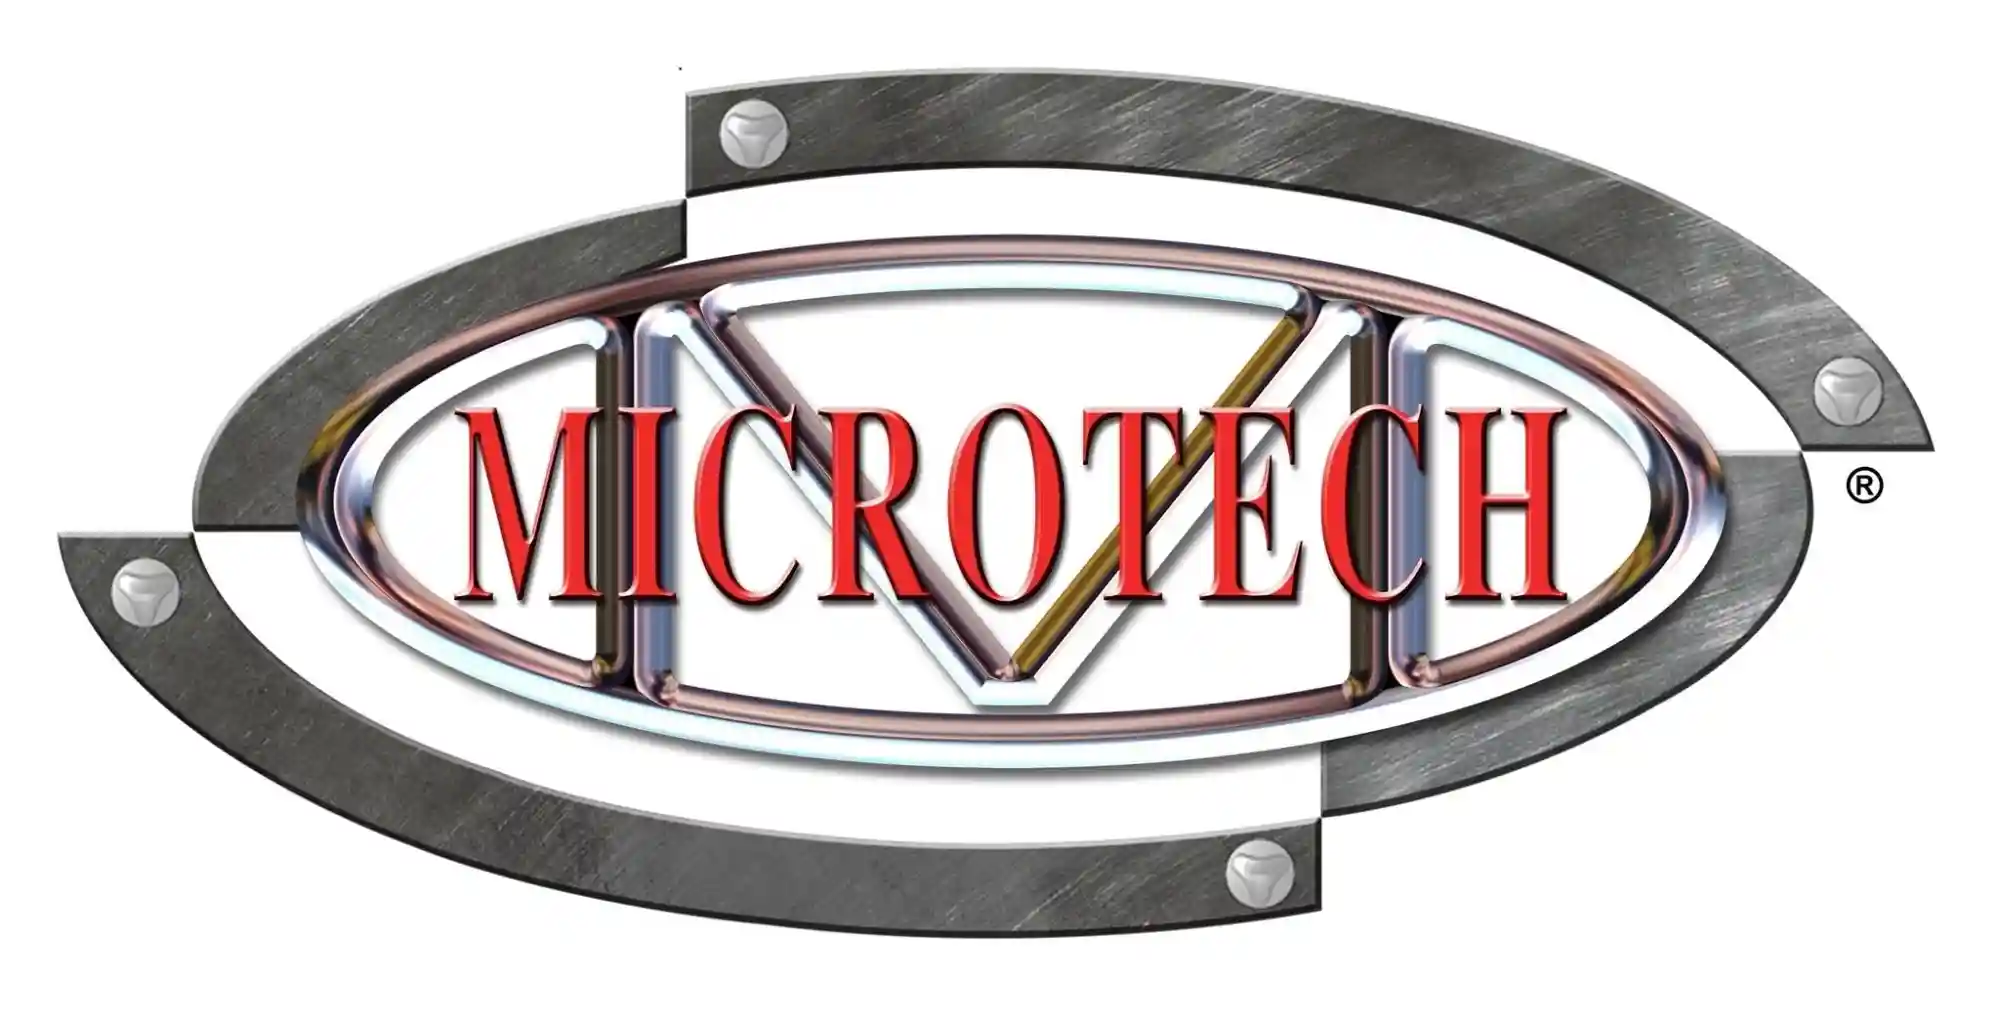 Microtech Knives First Responder Discount